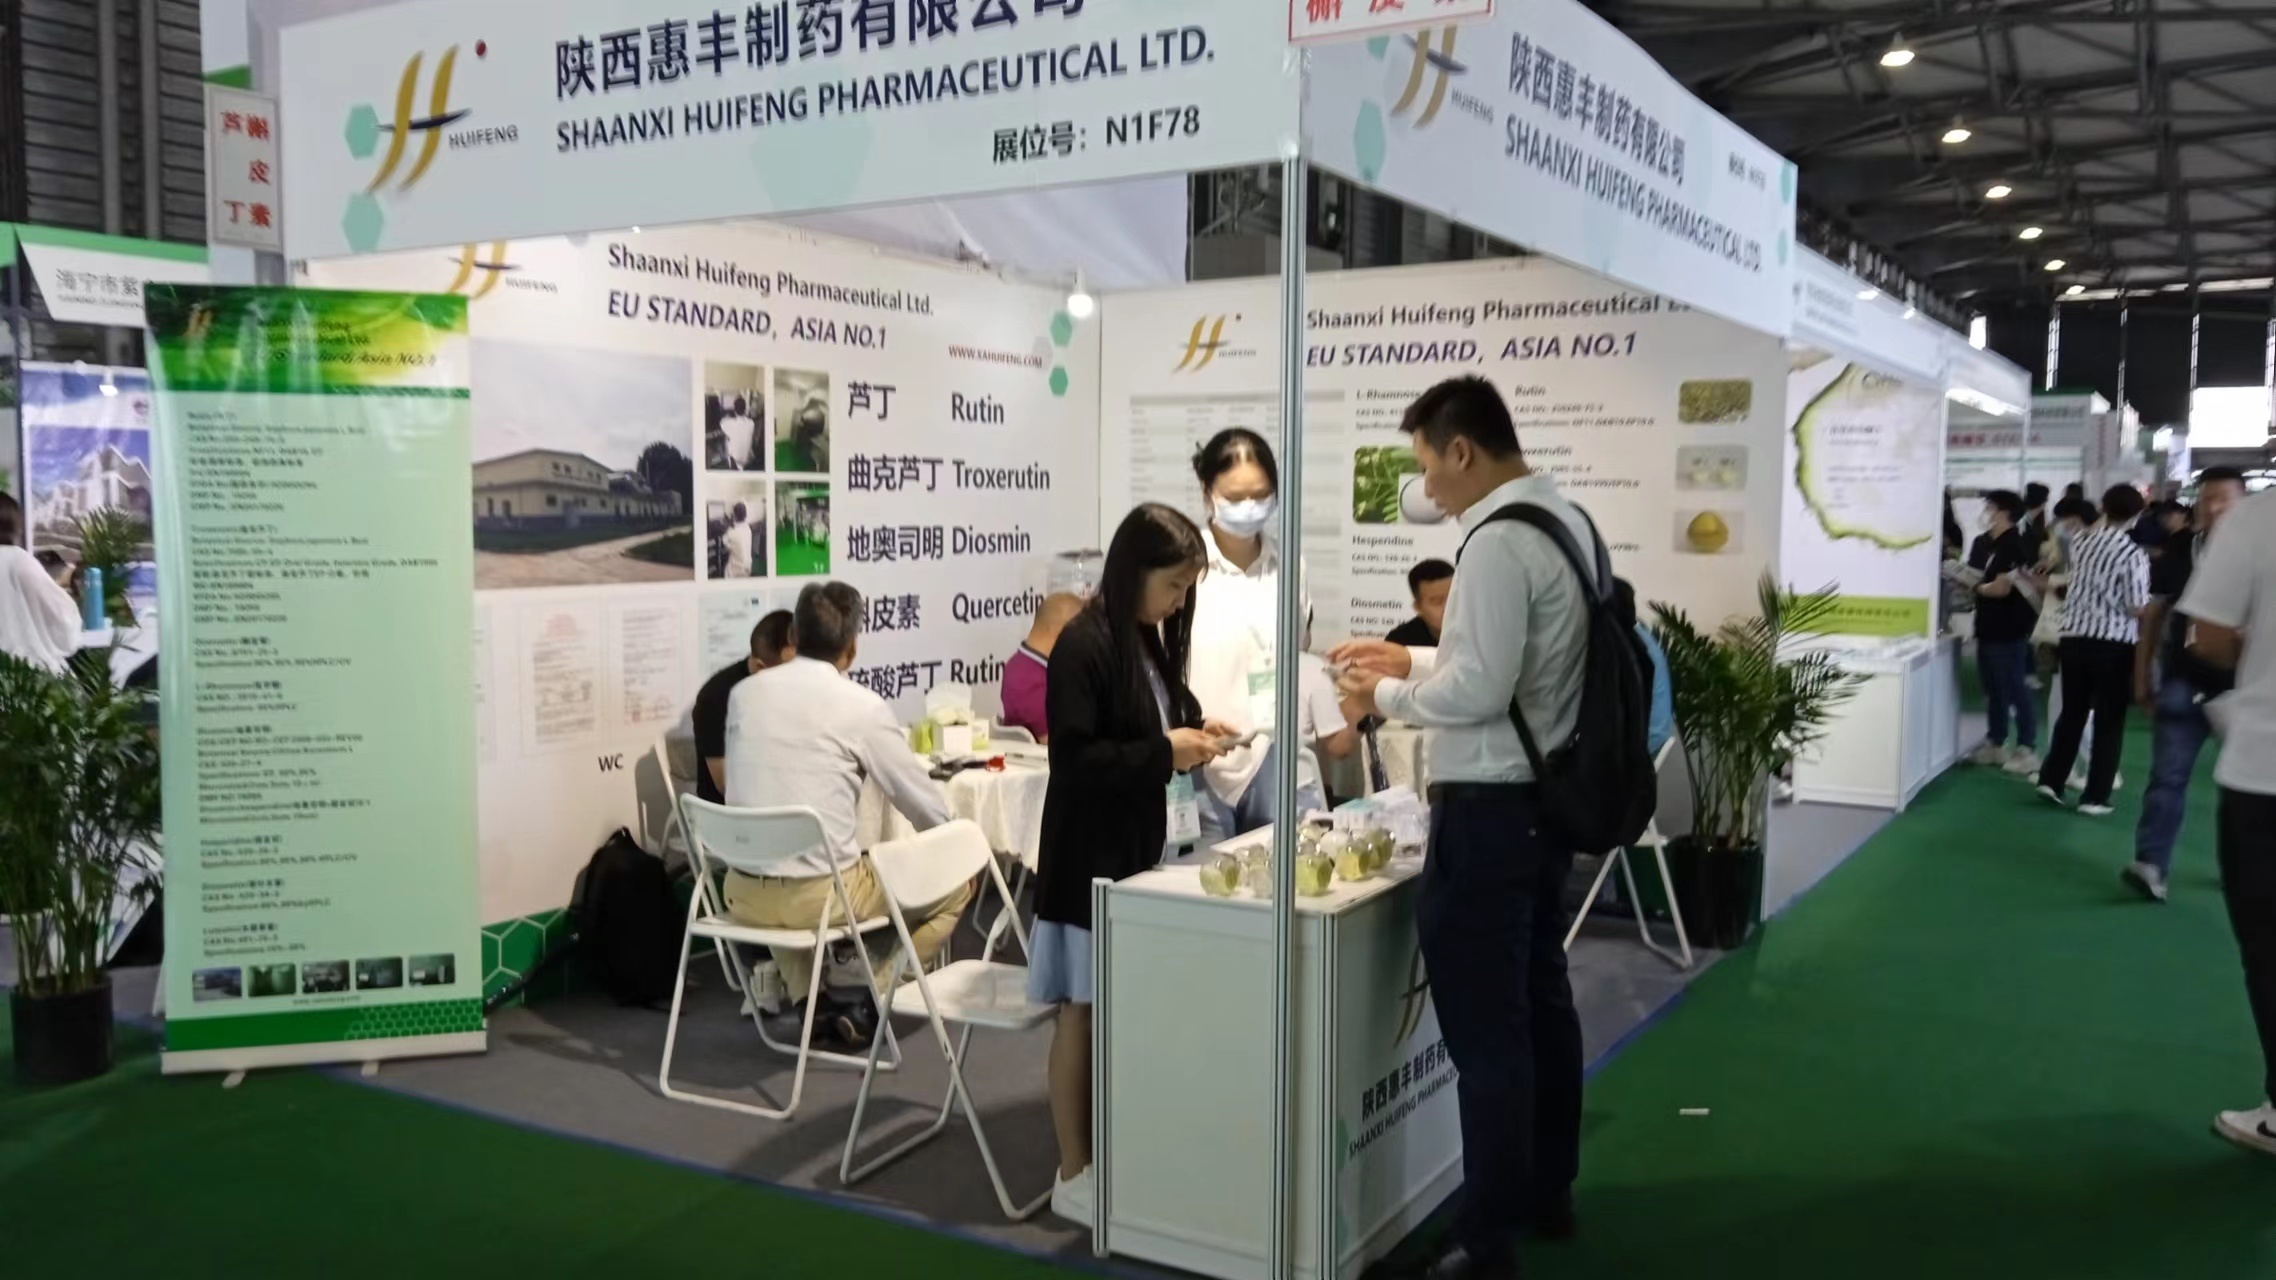 Shaanxi Huifeng Pharmaceutical Ltd. participated in the CPHI exhibition